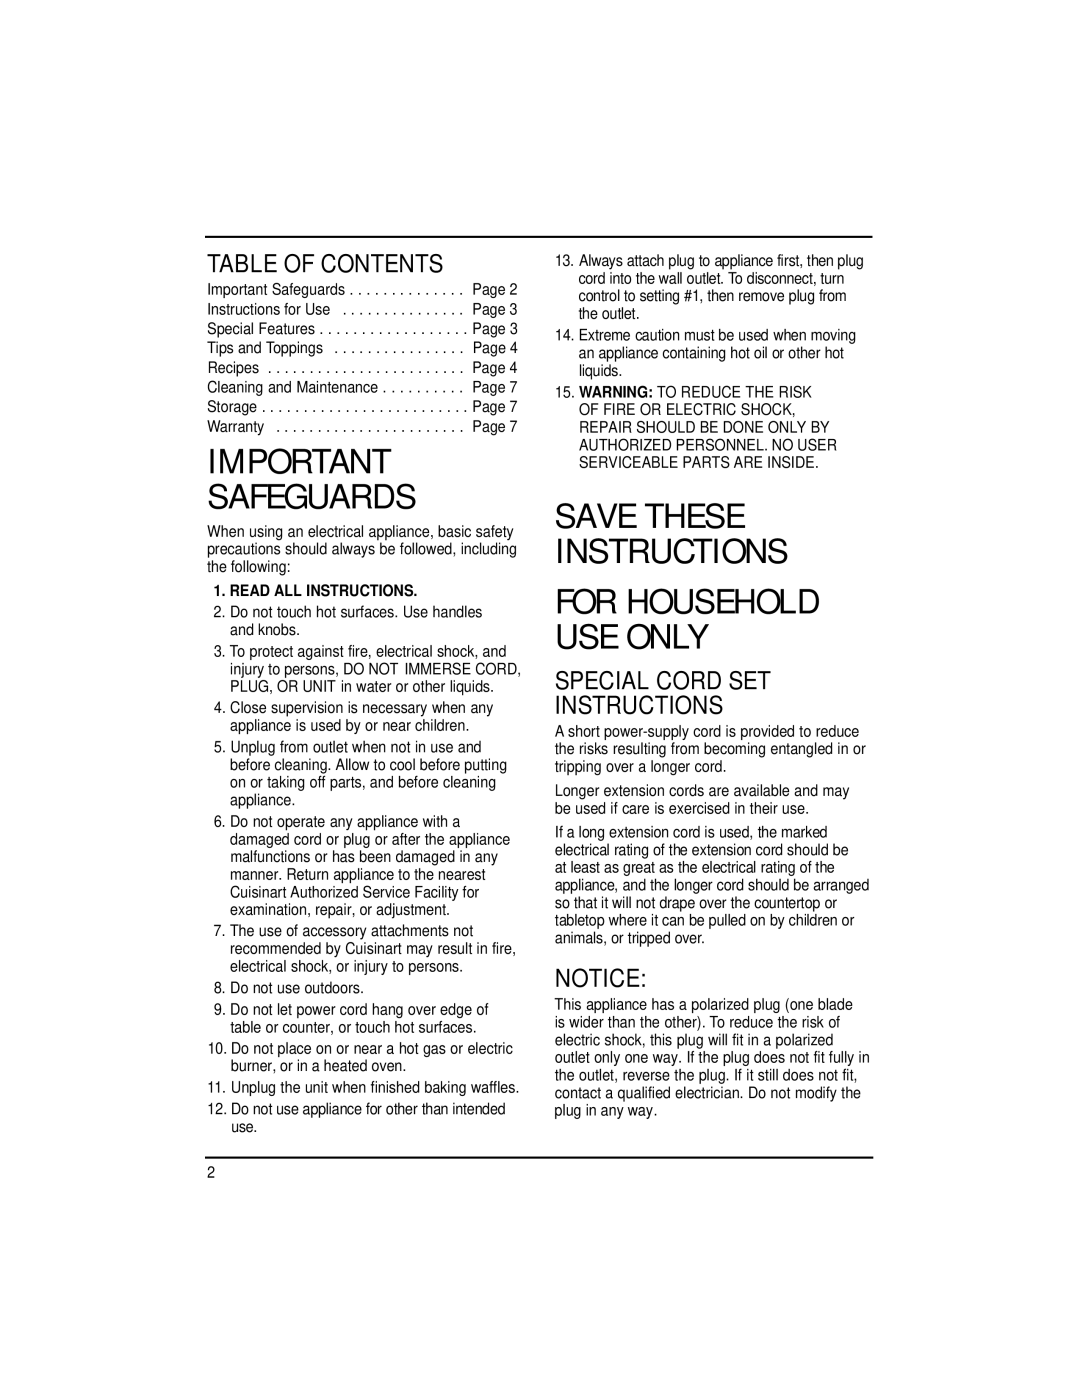 Cuisinart WMR-CA manual Table Of Contents, Special Cord Set Instructions, Safeguards, Save These Instructions 